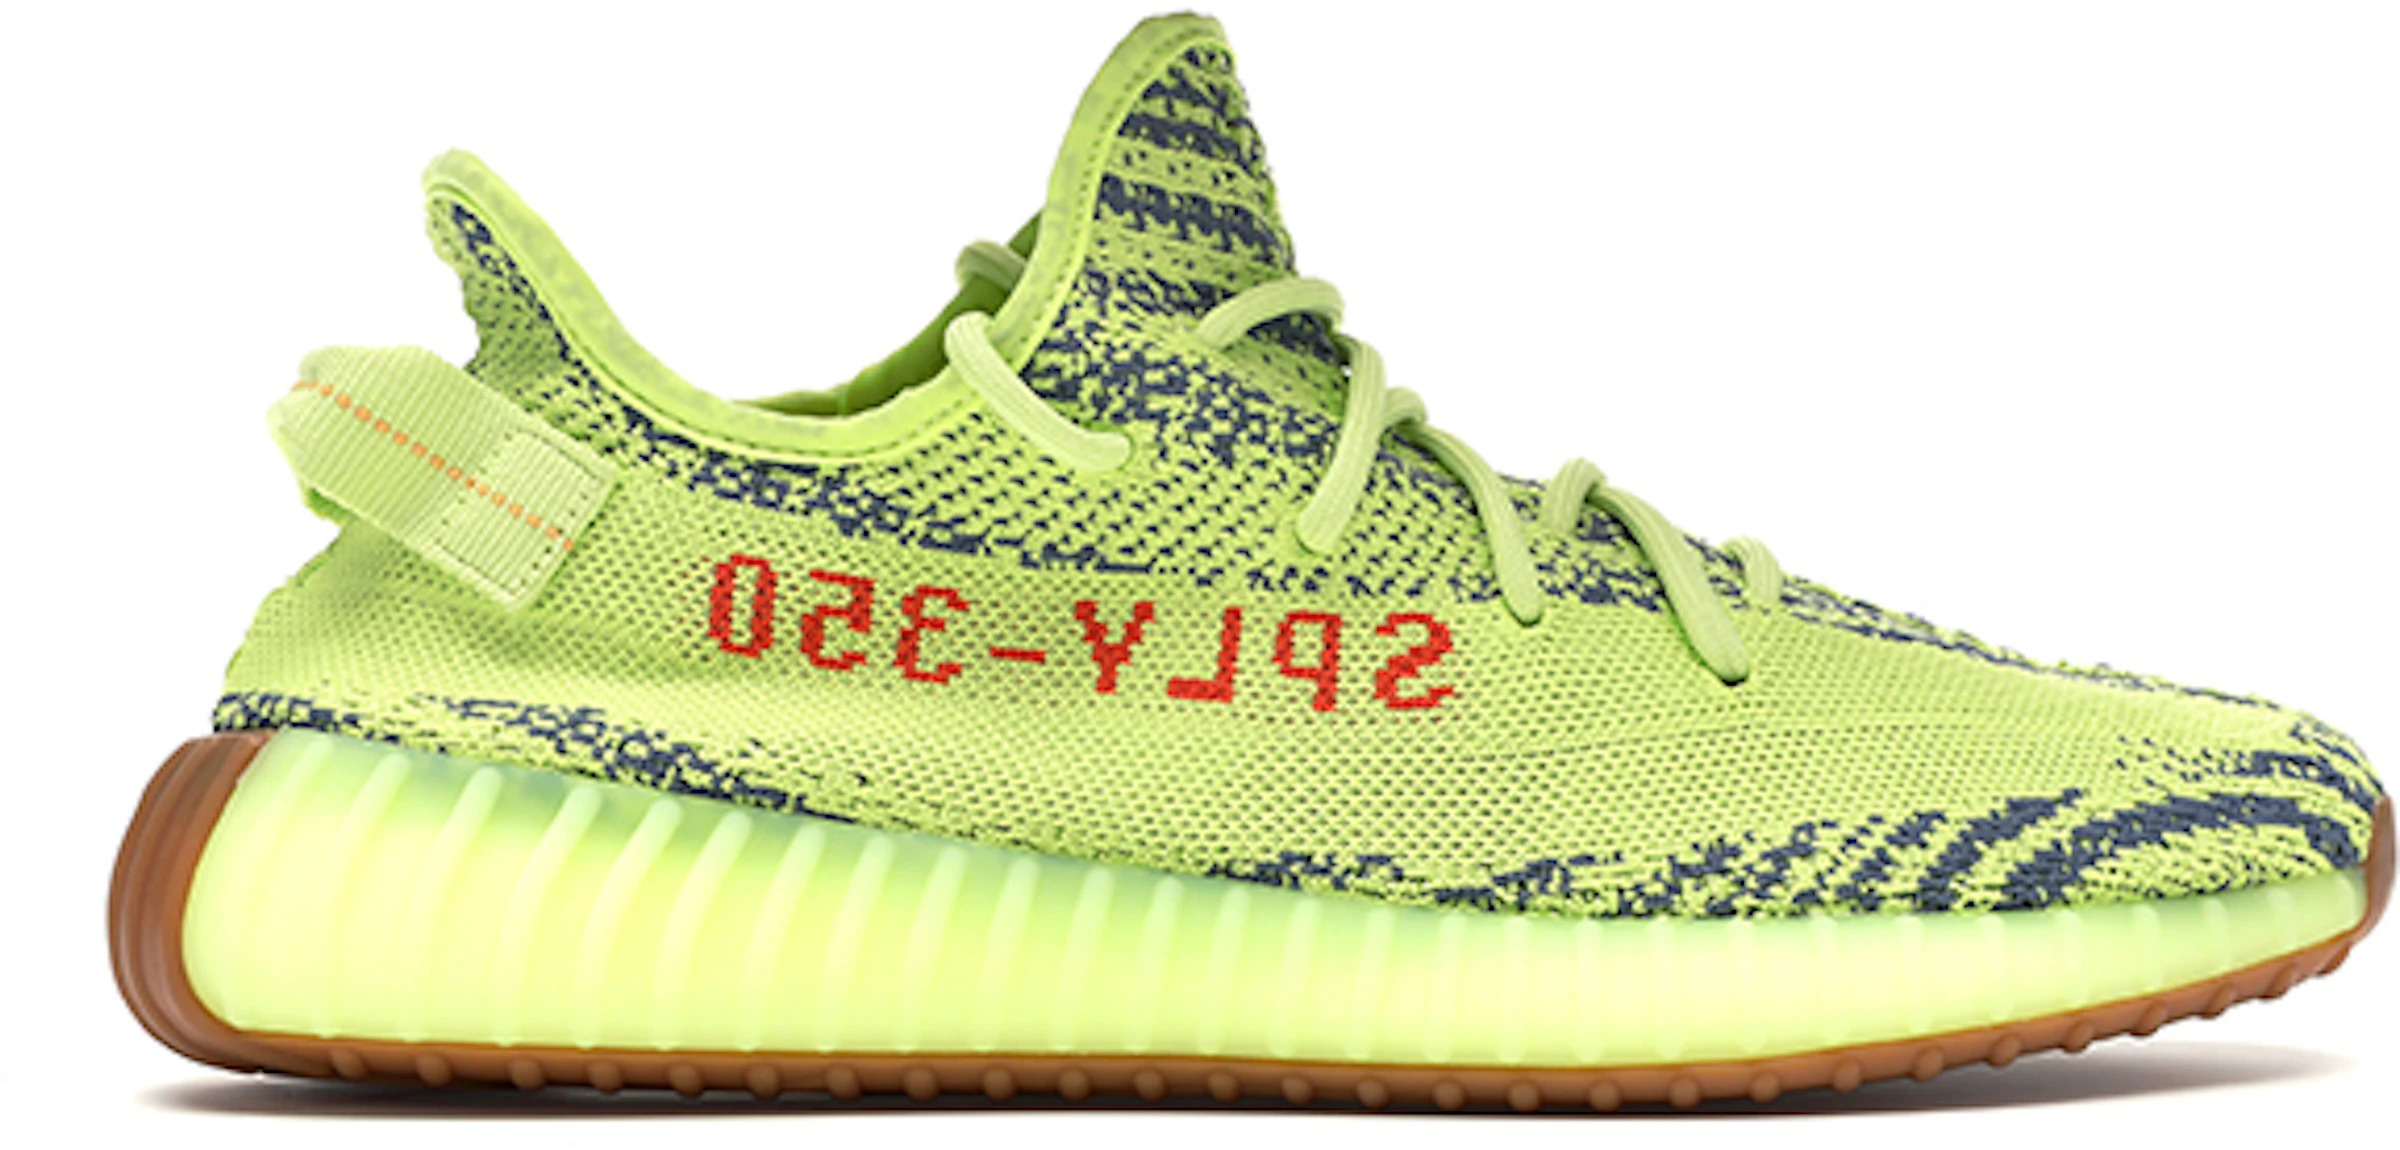 Adidas Yeezy Boost 350 V2 Glow | peacecommission.kdsg.gov.ng